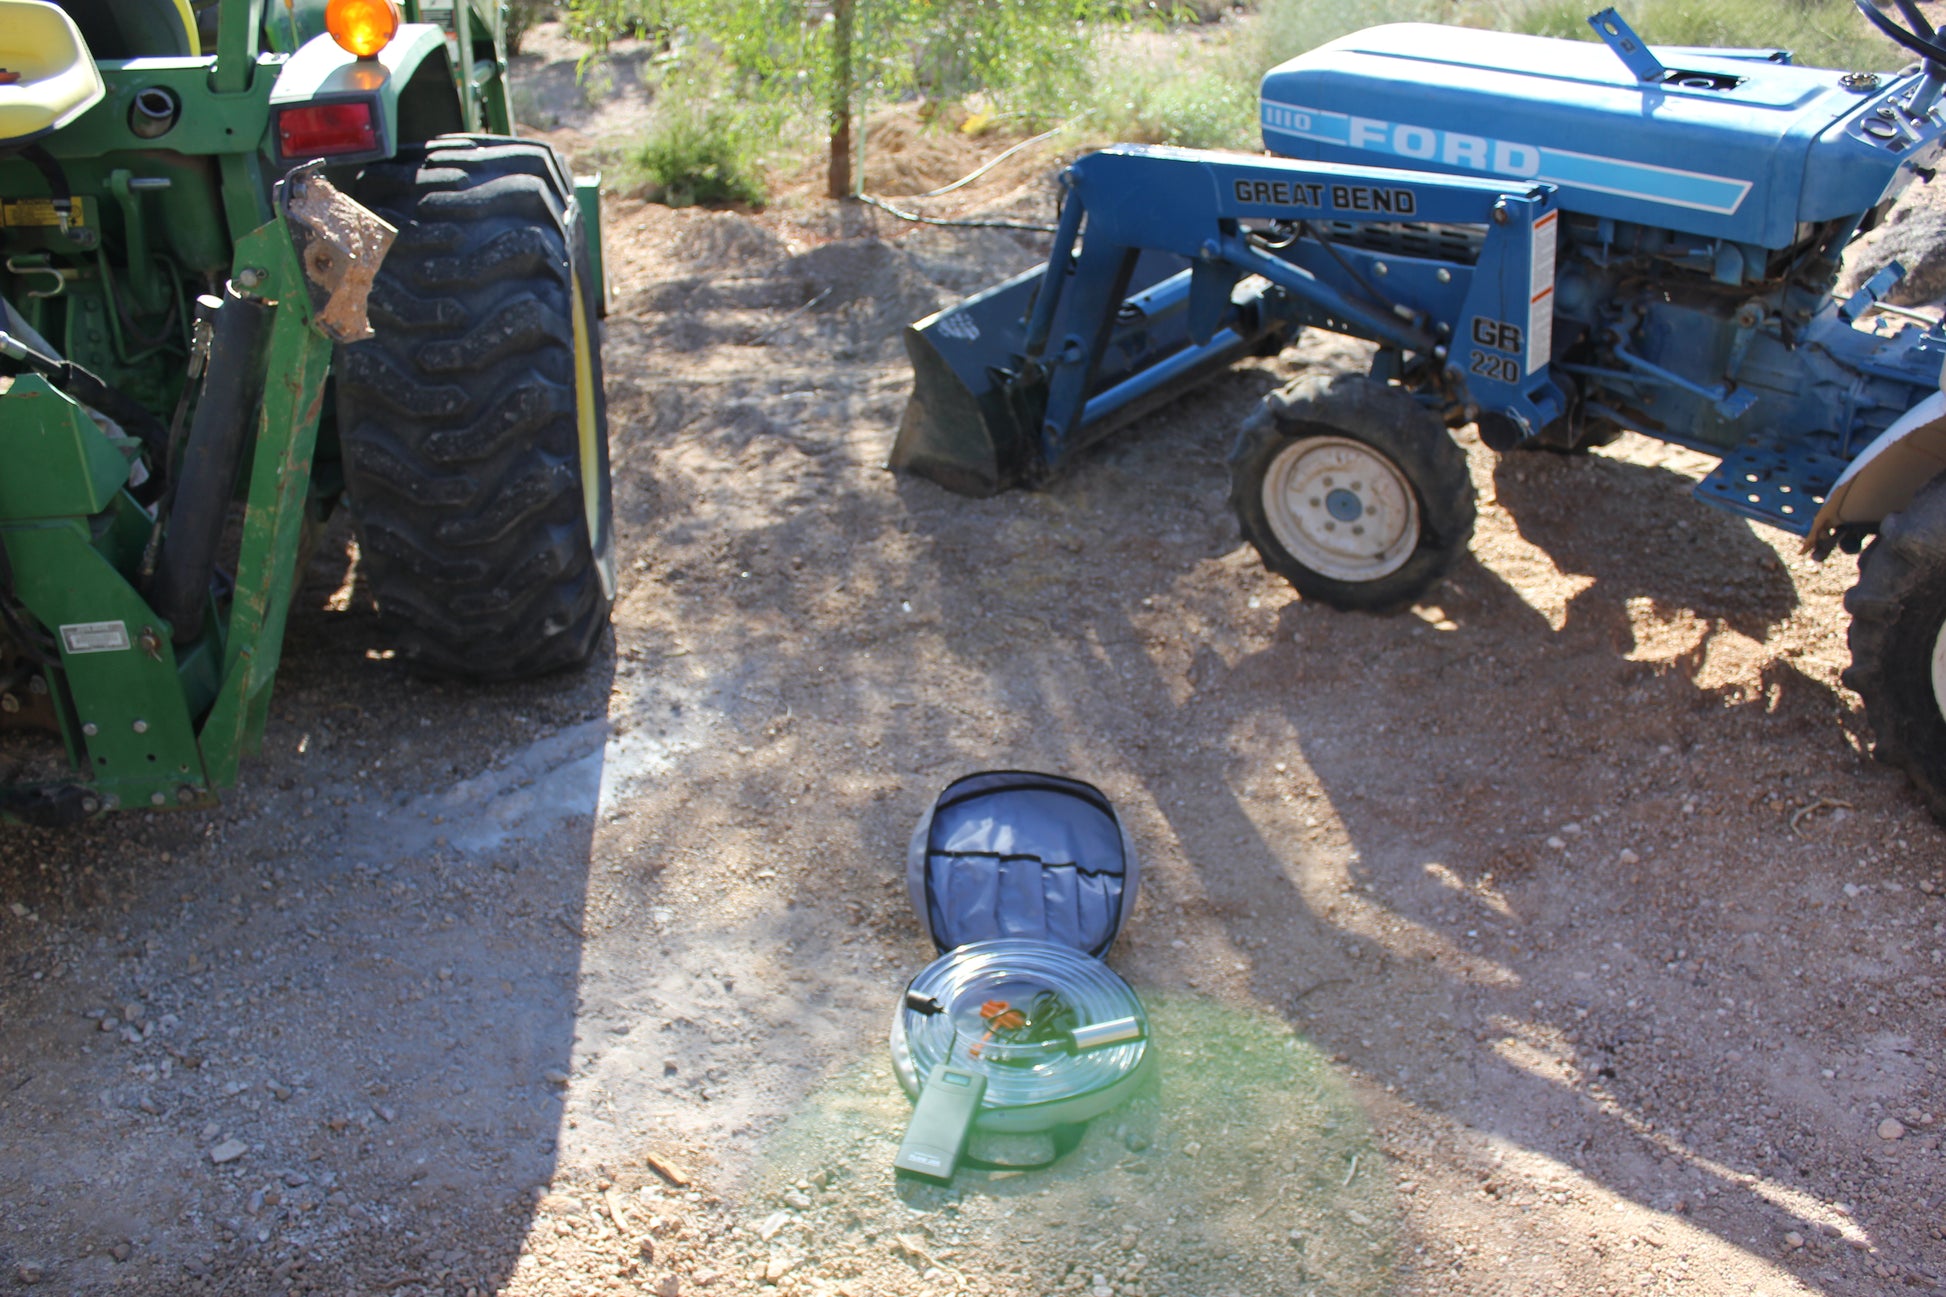 Submersible siphon in carry bag being used between two tractors to move fuel with battery